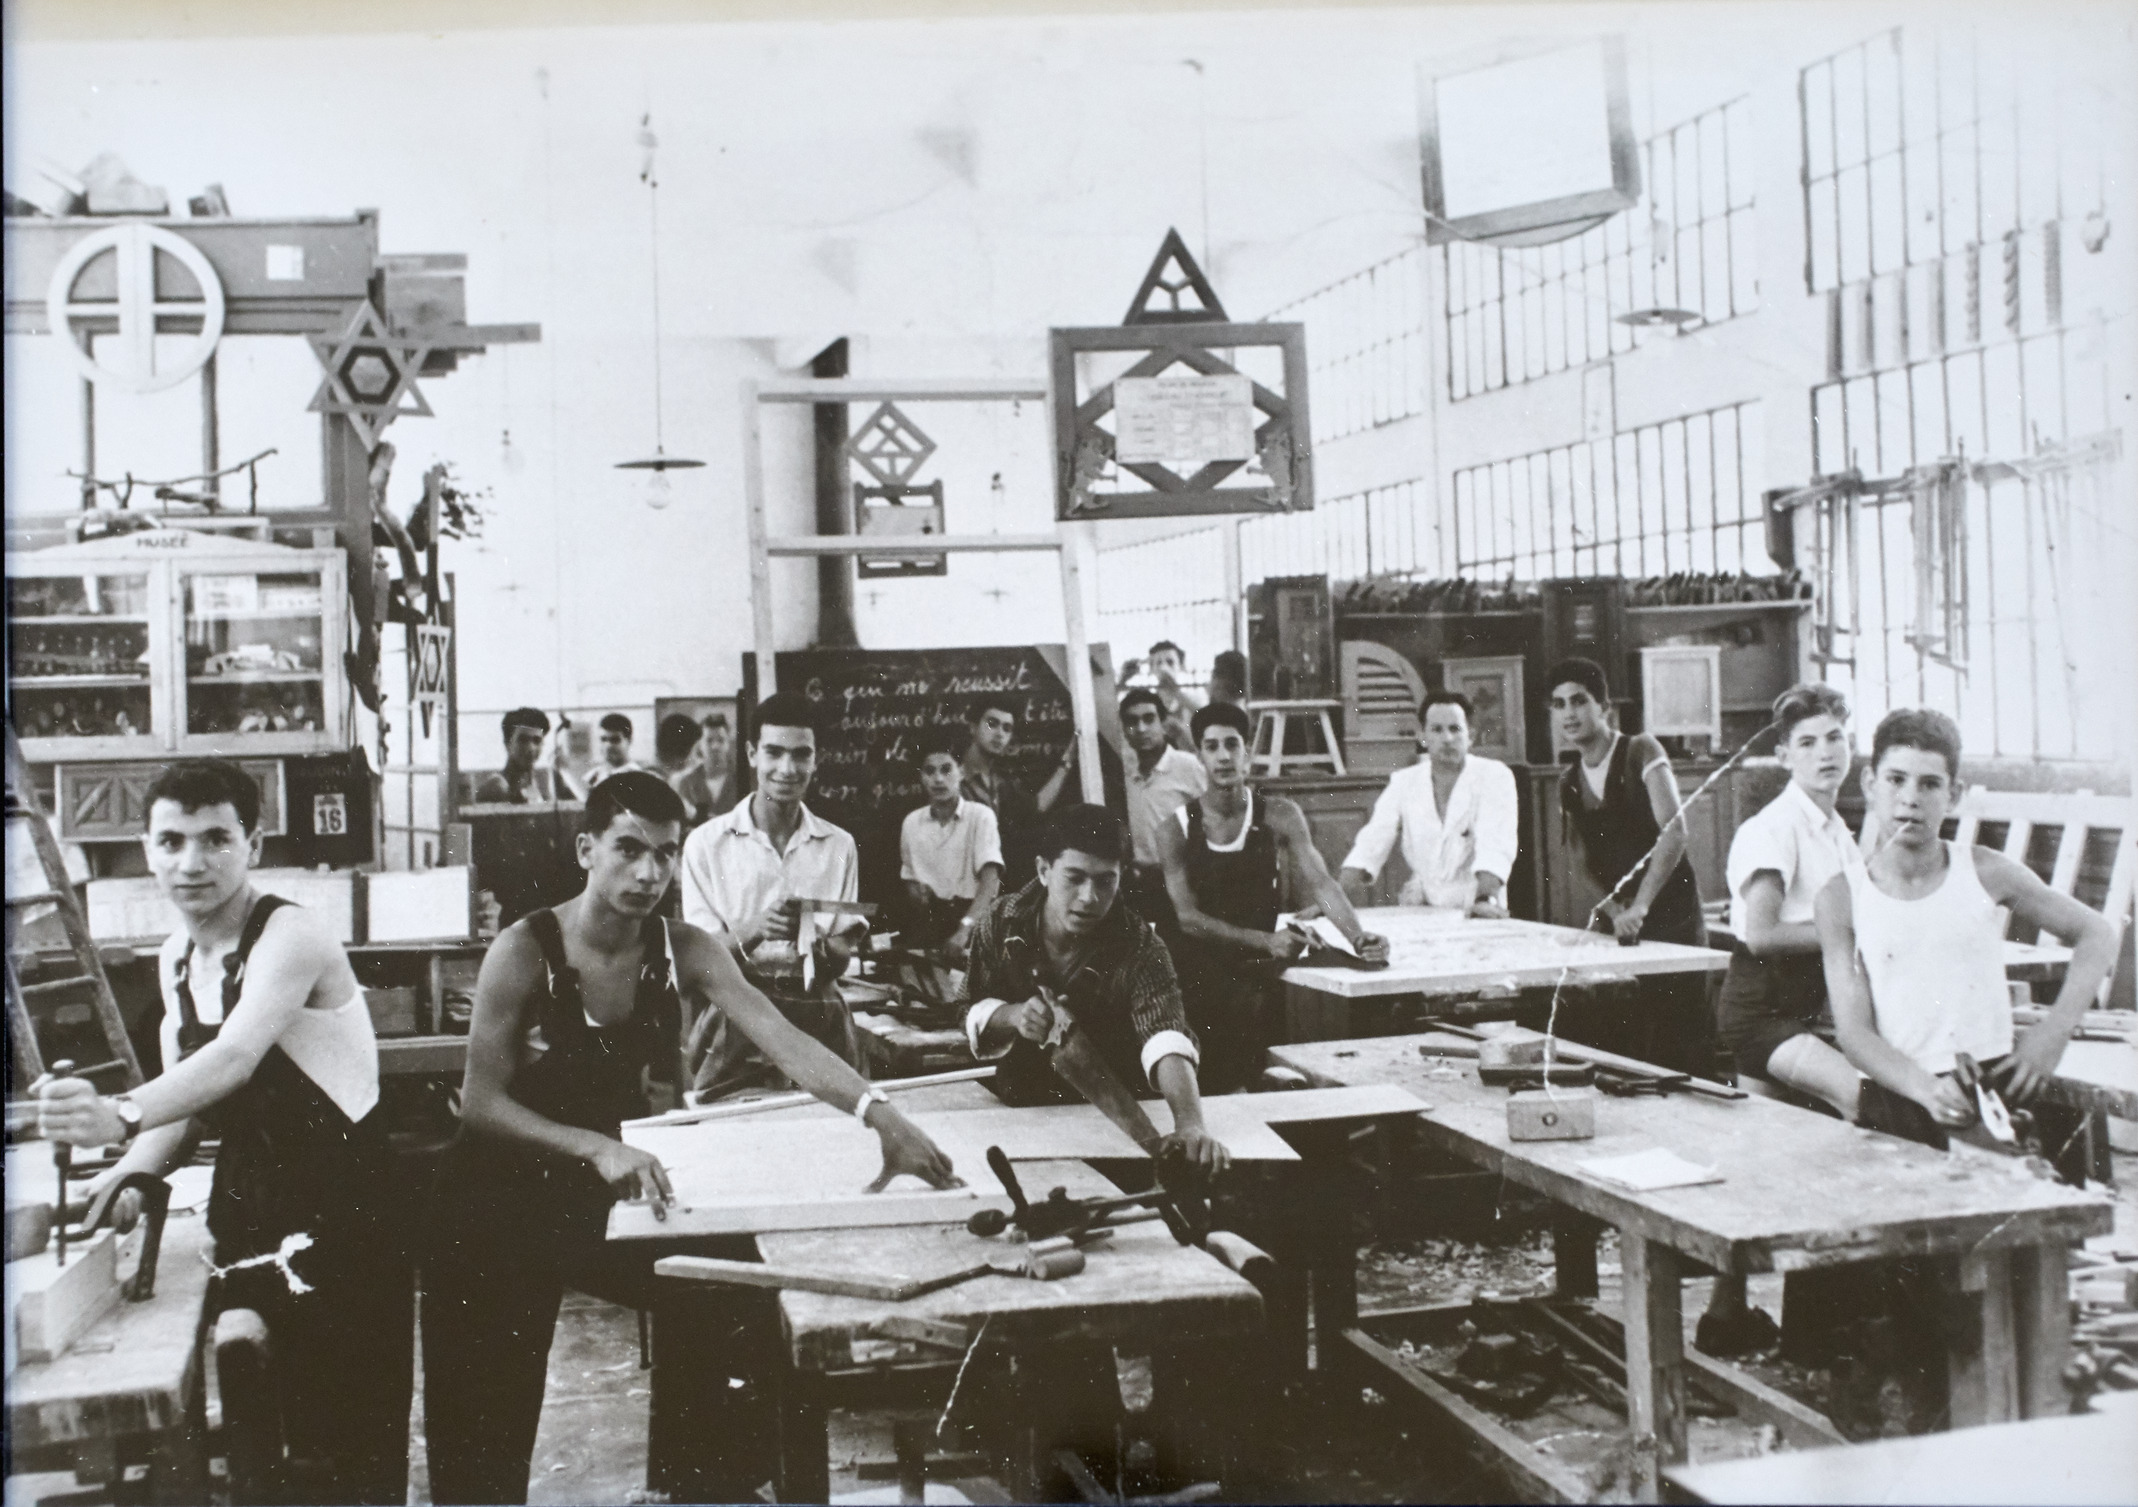 Photograph of ORT Vocational School in Fez, Morocco, 1954